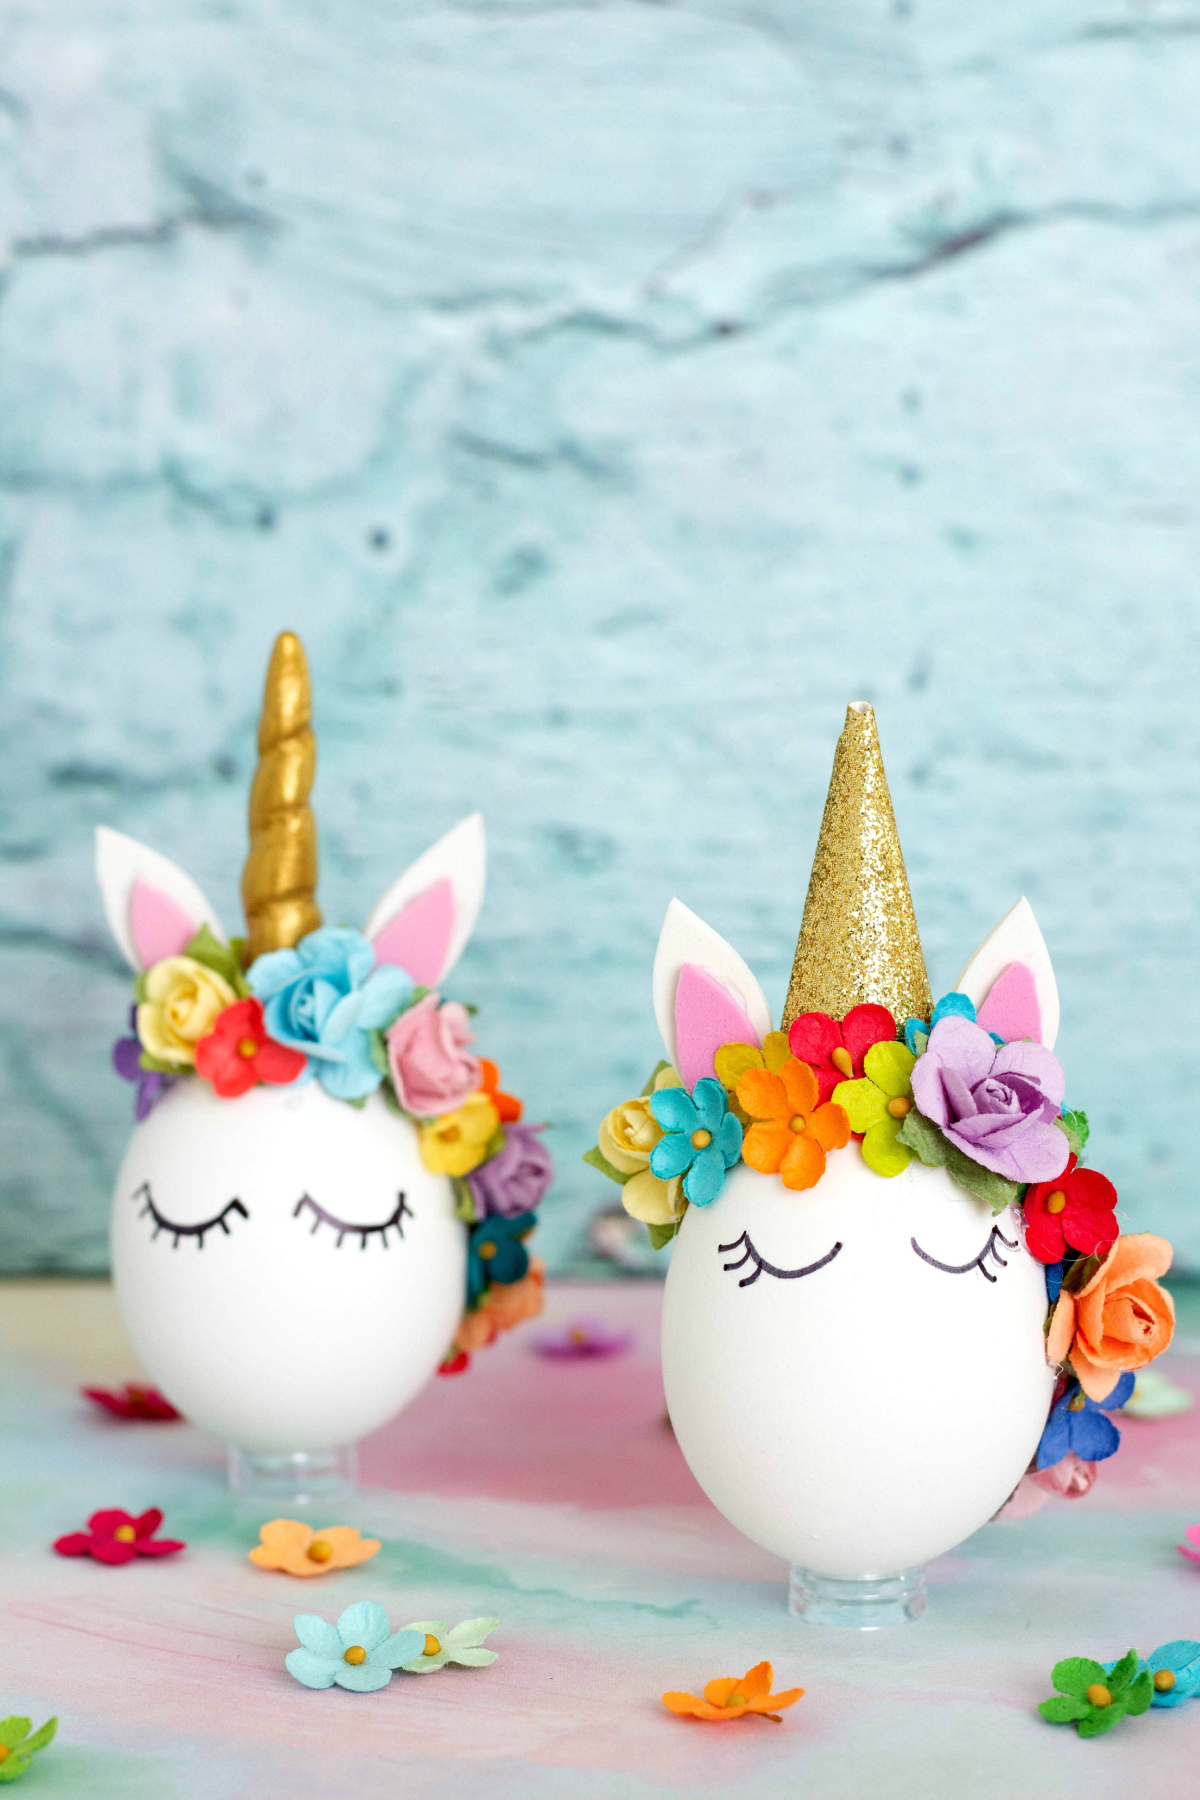 Two unicorn shaped Easter eggs with flowers on them.